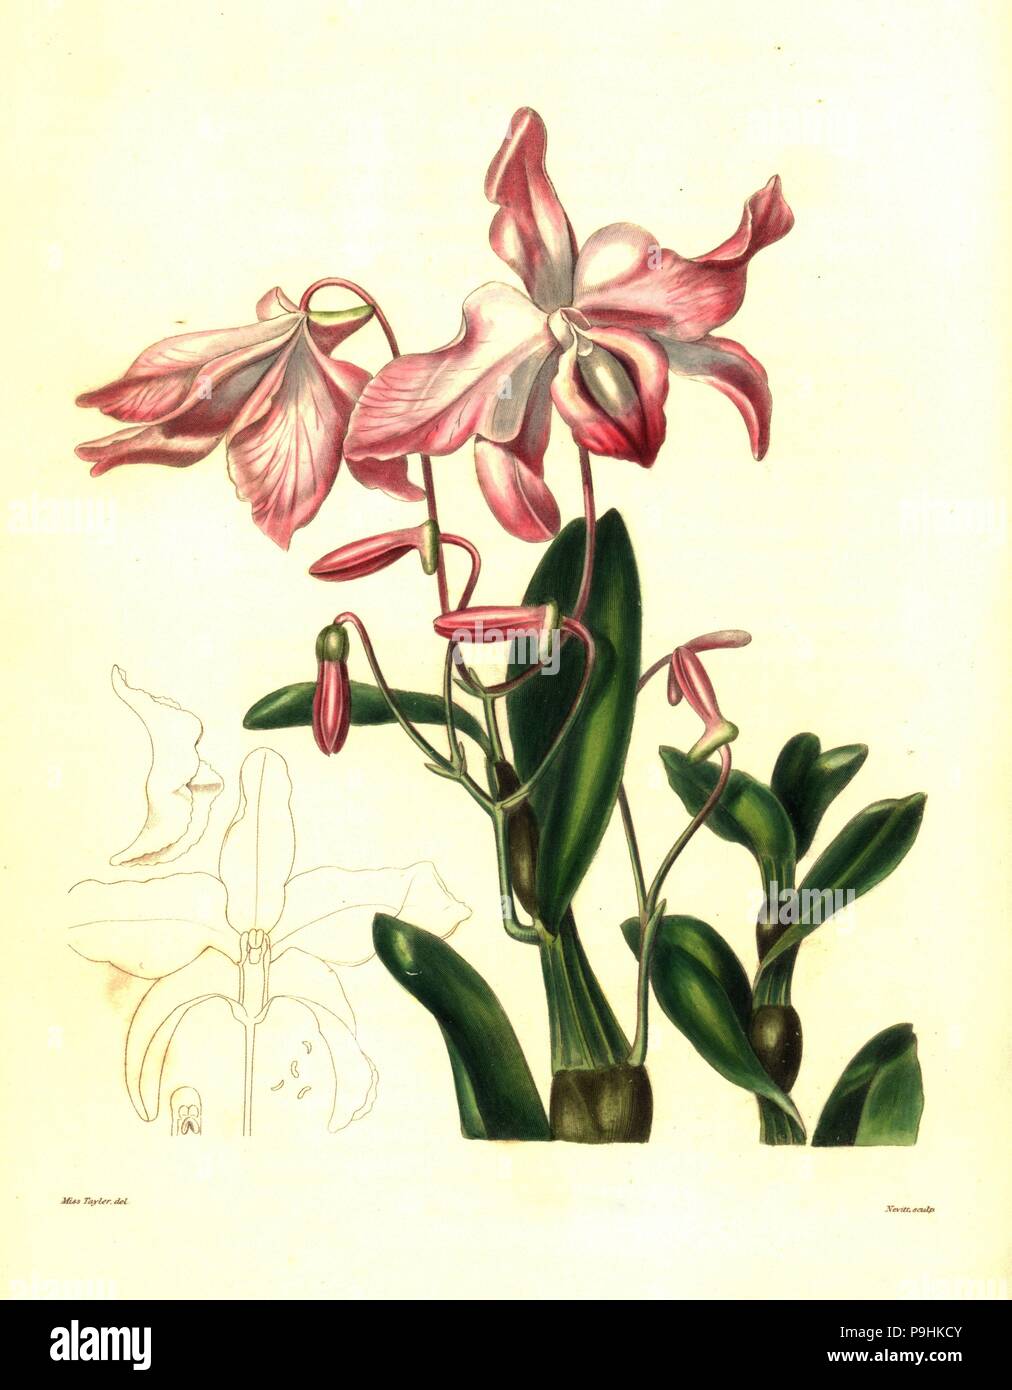 Carrot fern, sekkoku, or necklace-like dendrobium orchid, Dendrobium moniliforme. Handcoloured copperplate engraving by S. Nevitt after a botanical illustration by Mrs Augusta Withers from Benjamin Maund and the Rev. John Stevens Henslow's The Botanist, London, 1836. Stock Photo